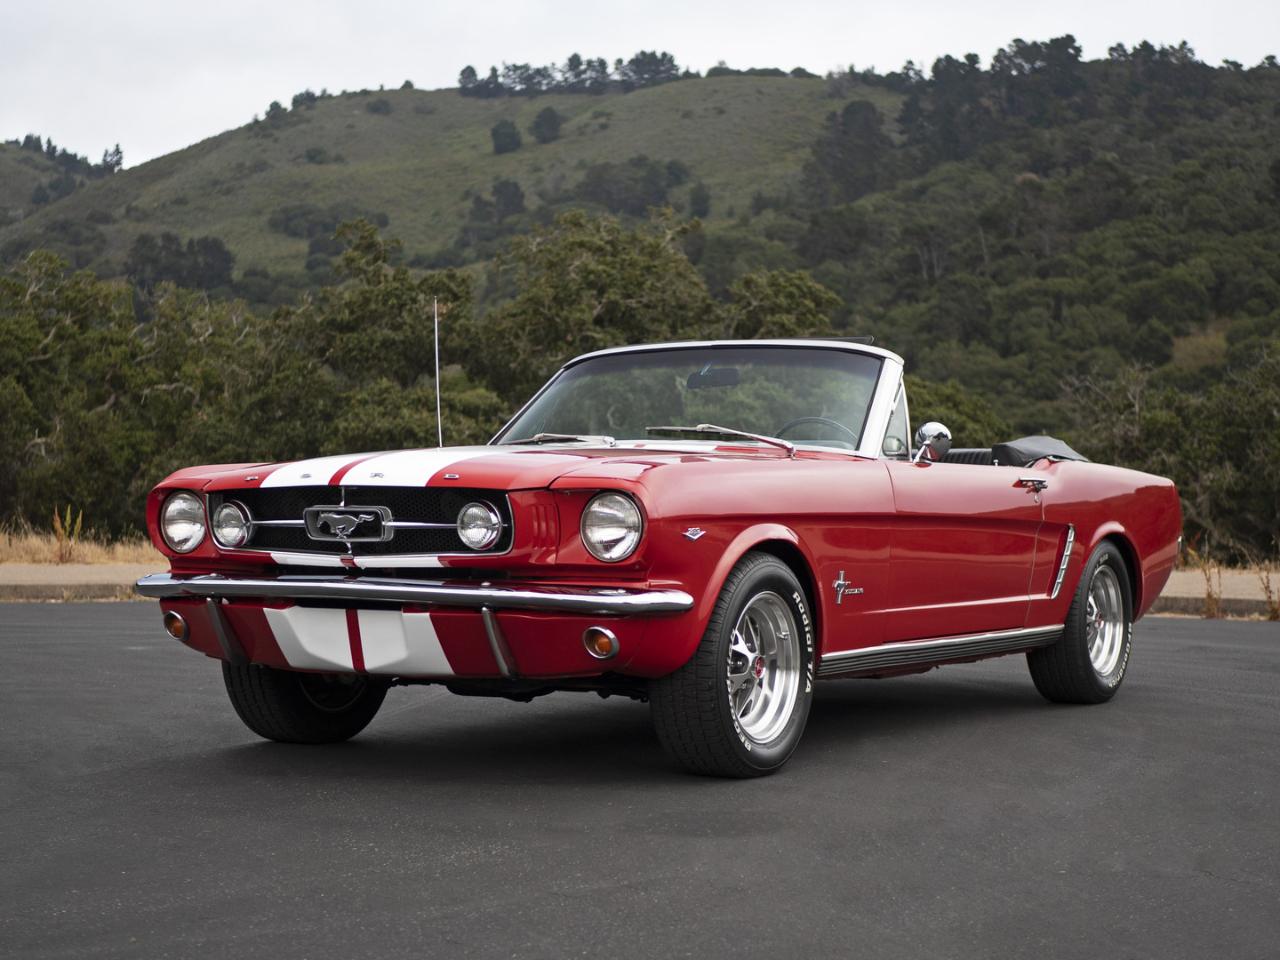 1965 Ford Mustang - Red